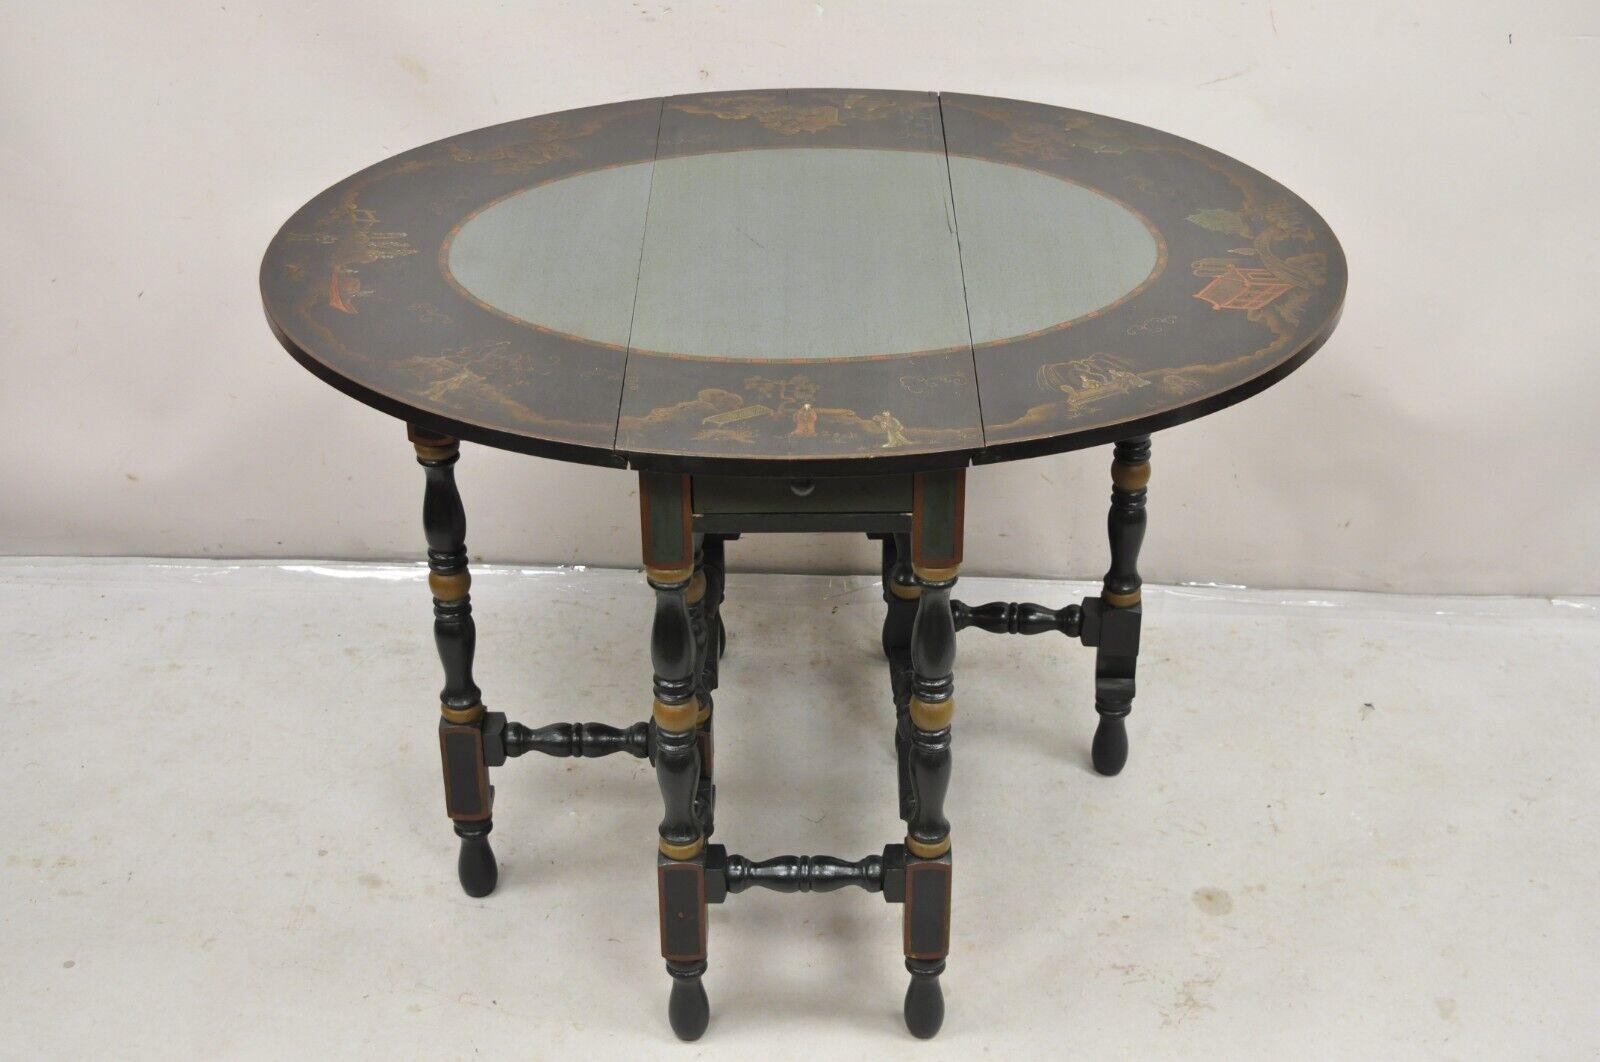 Antique Chinoiserie Lacquered Chinese Gate Leg Drop Leaf Blue and Green Painted Side Table. Item features a single dovetailed drawer, nicely painted details, shapely oval form when open, very nice antique item. Circa Early 20th Century
Measurements: